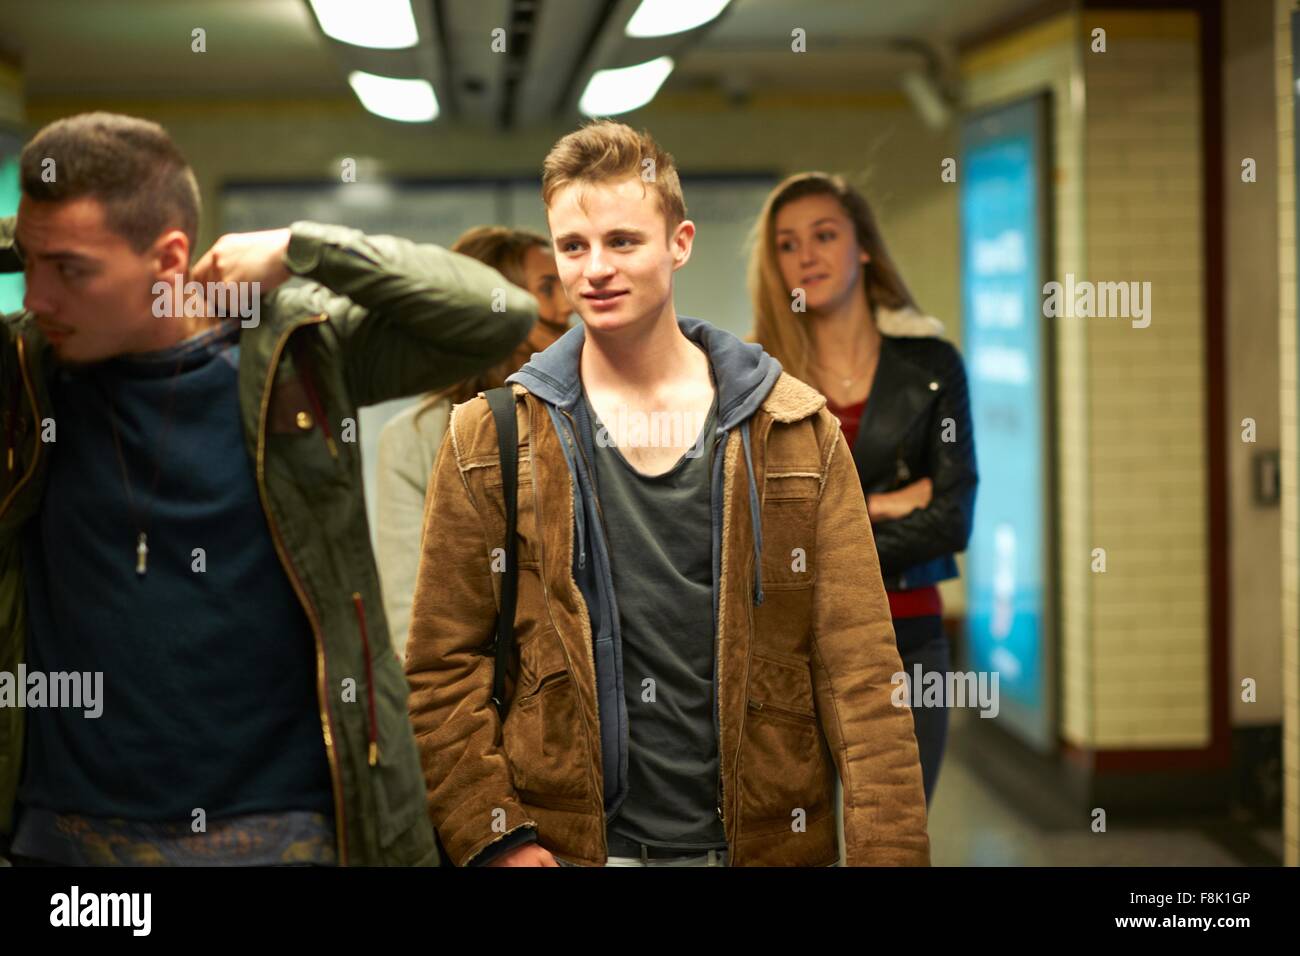 Four young adult friends walking through London underground station, London, UK Stock Photo